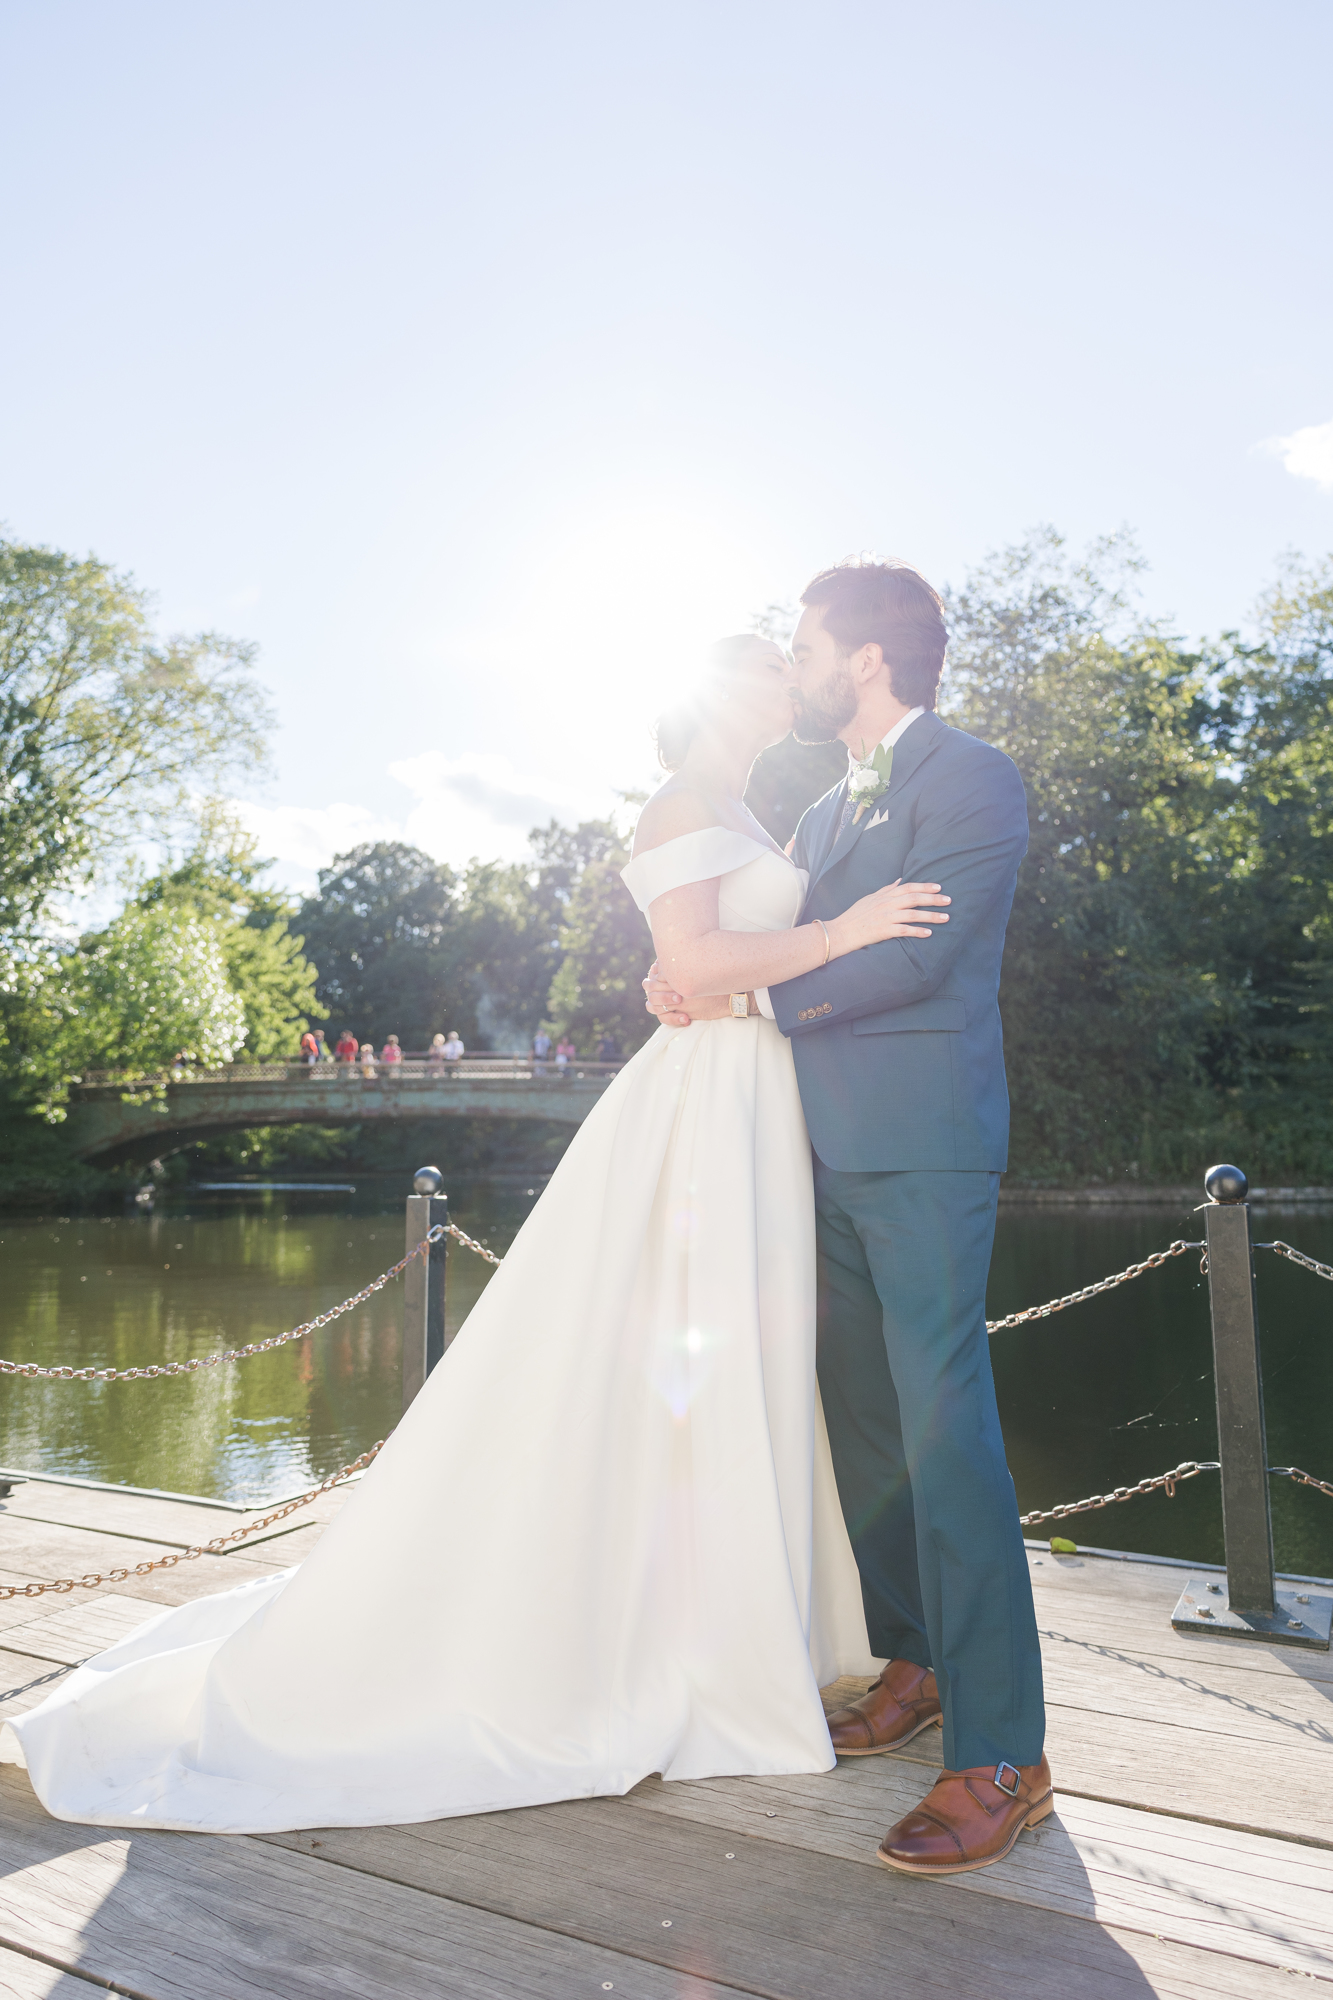 Beautiful Autumn Wedding Photos at the Prospect Park Boathouse in Brooklyn